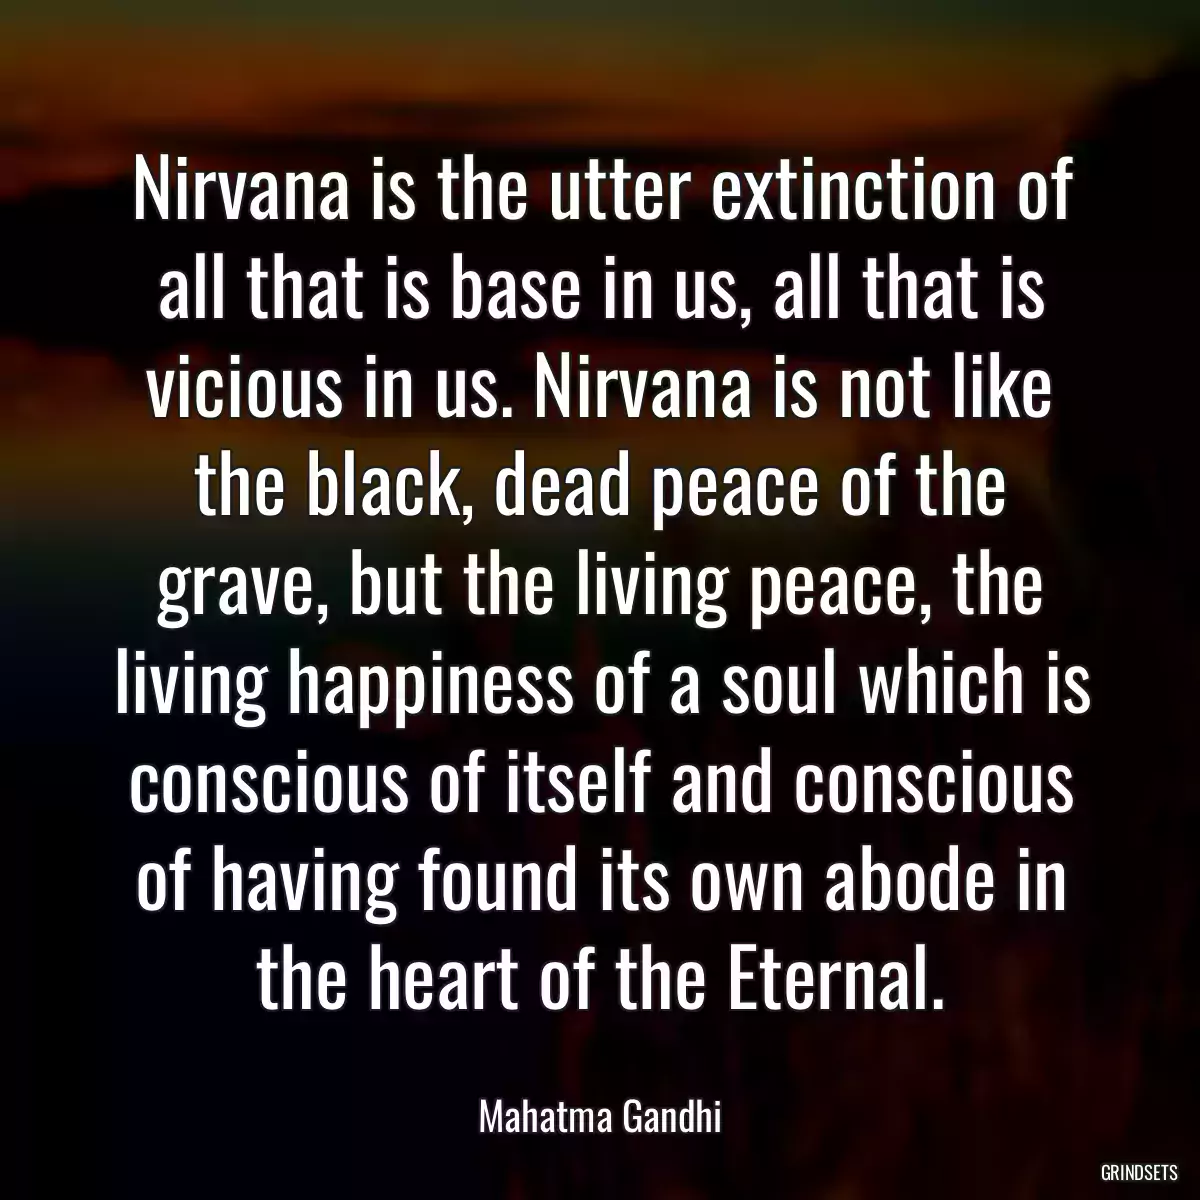 Nirvana is the utter extinction of all that is base in us, all that is vicious in us. Nirvana is not like the black, dead peace of the grave, but the living peace, the living happiness of a soul which is conscious of itself and conscious of having found its own abode in the heart of the Eternal.